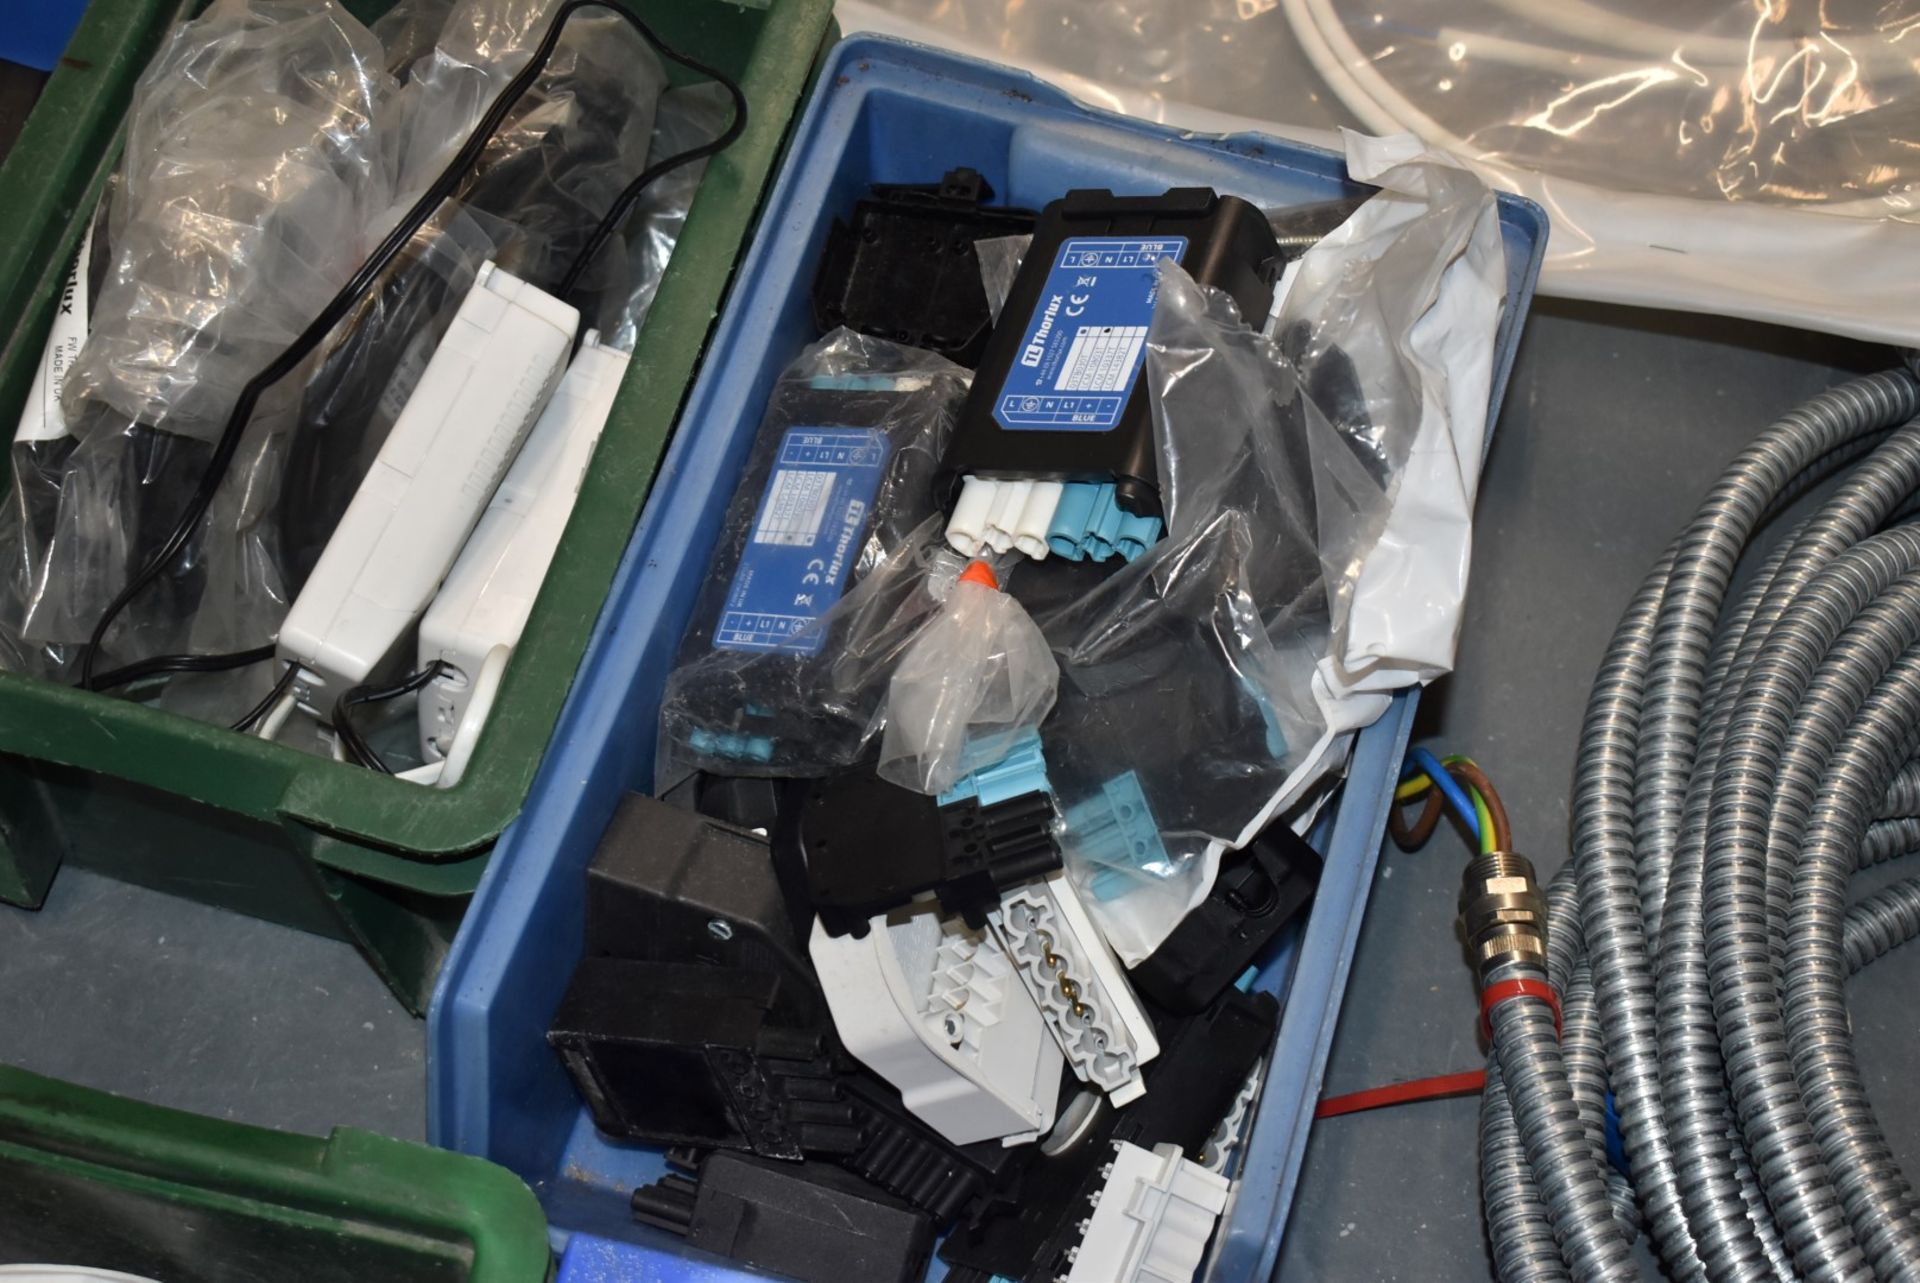 1 x Job Lot Of Assorted Electrical Components - Ref: C654 - CL816 - Location: Birmingham, B45 - Image 6 of 19